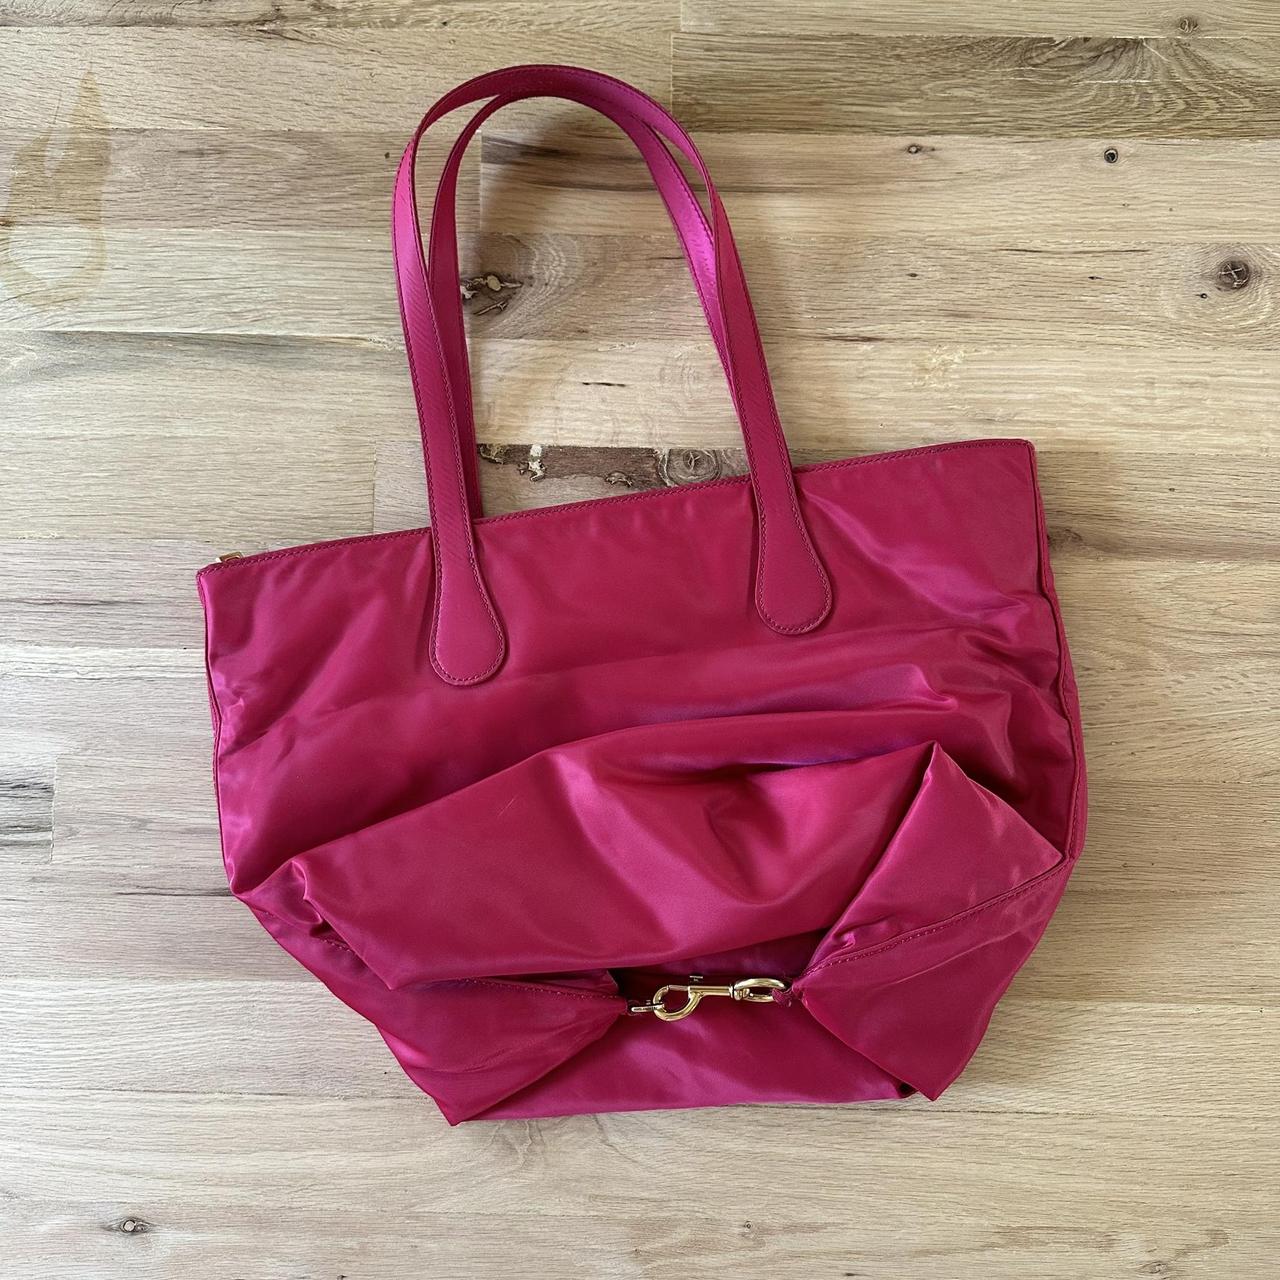 Pink Marc Jacobs Bag •The tote bag •small tote - Depop